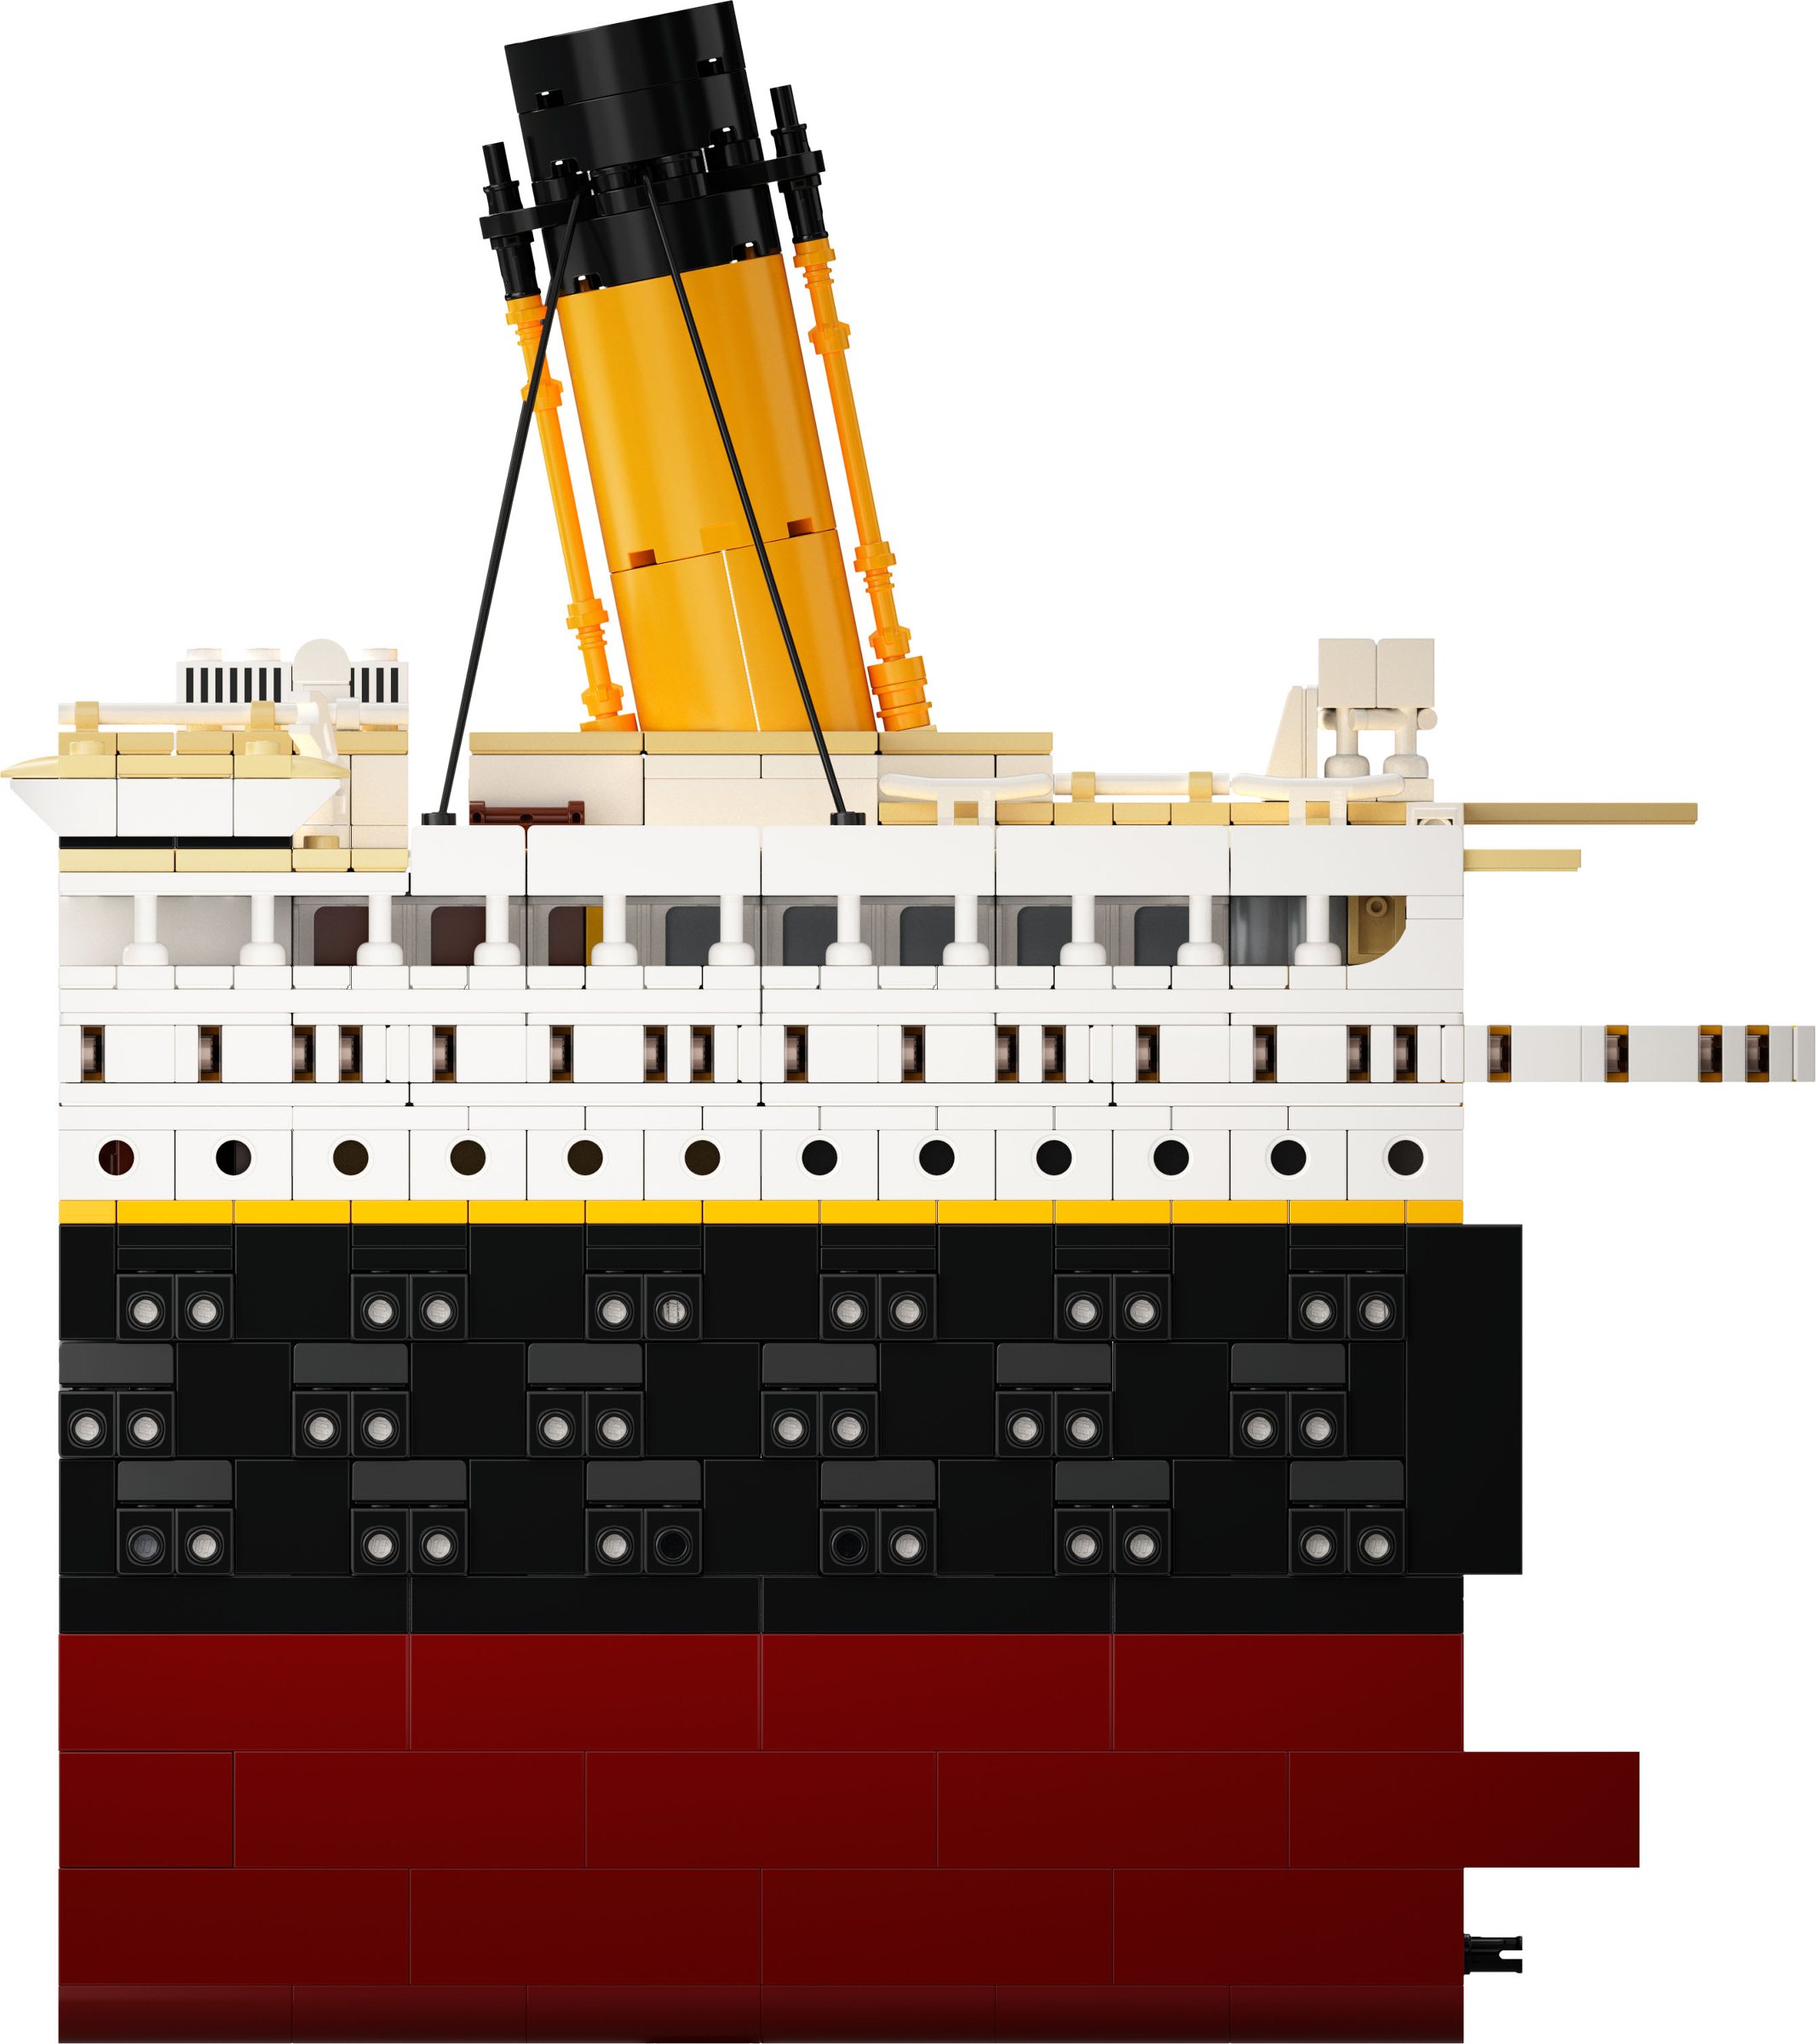 First look at reviews for LEGO for Adults 10294 Titanic